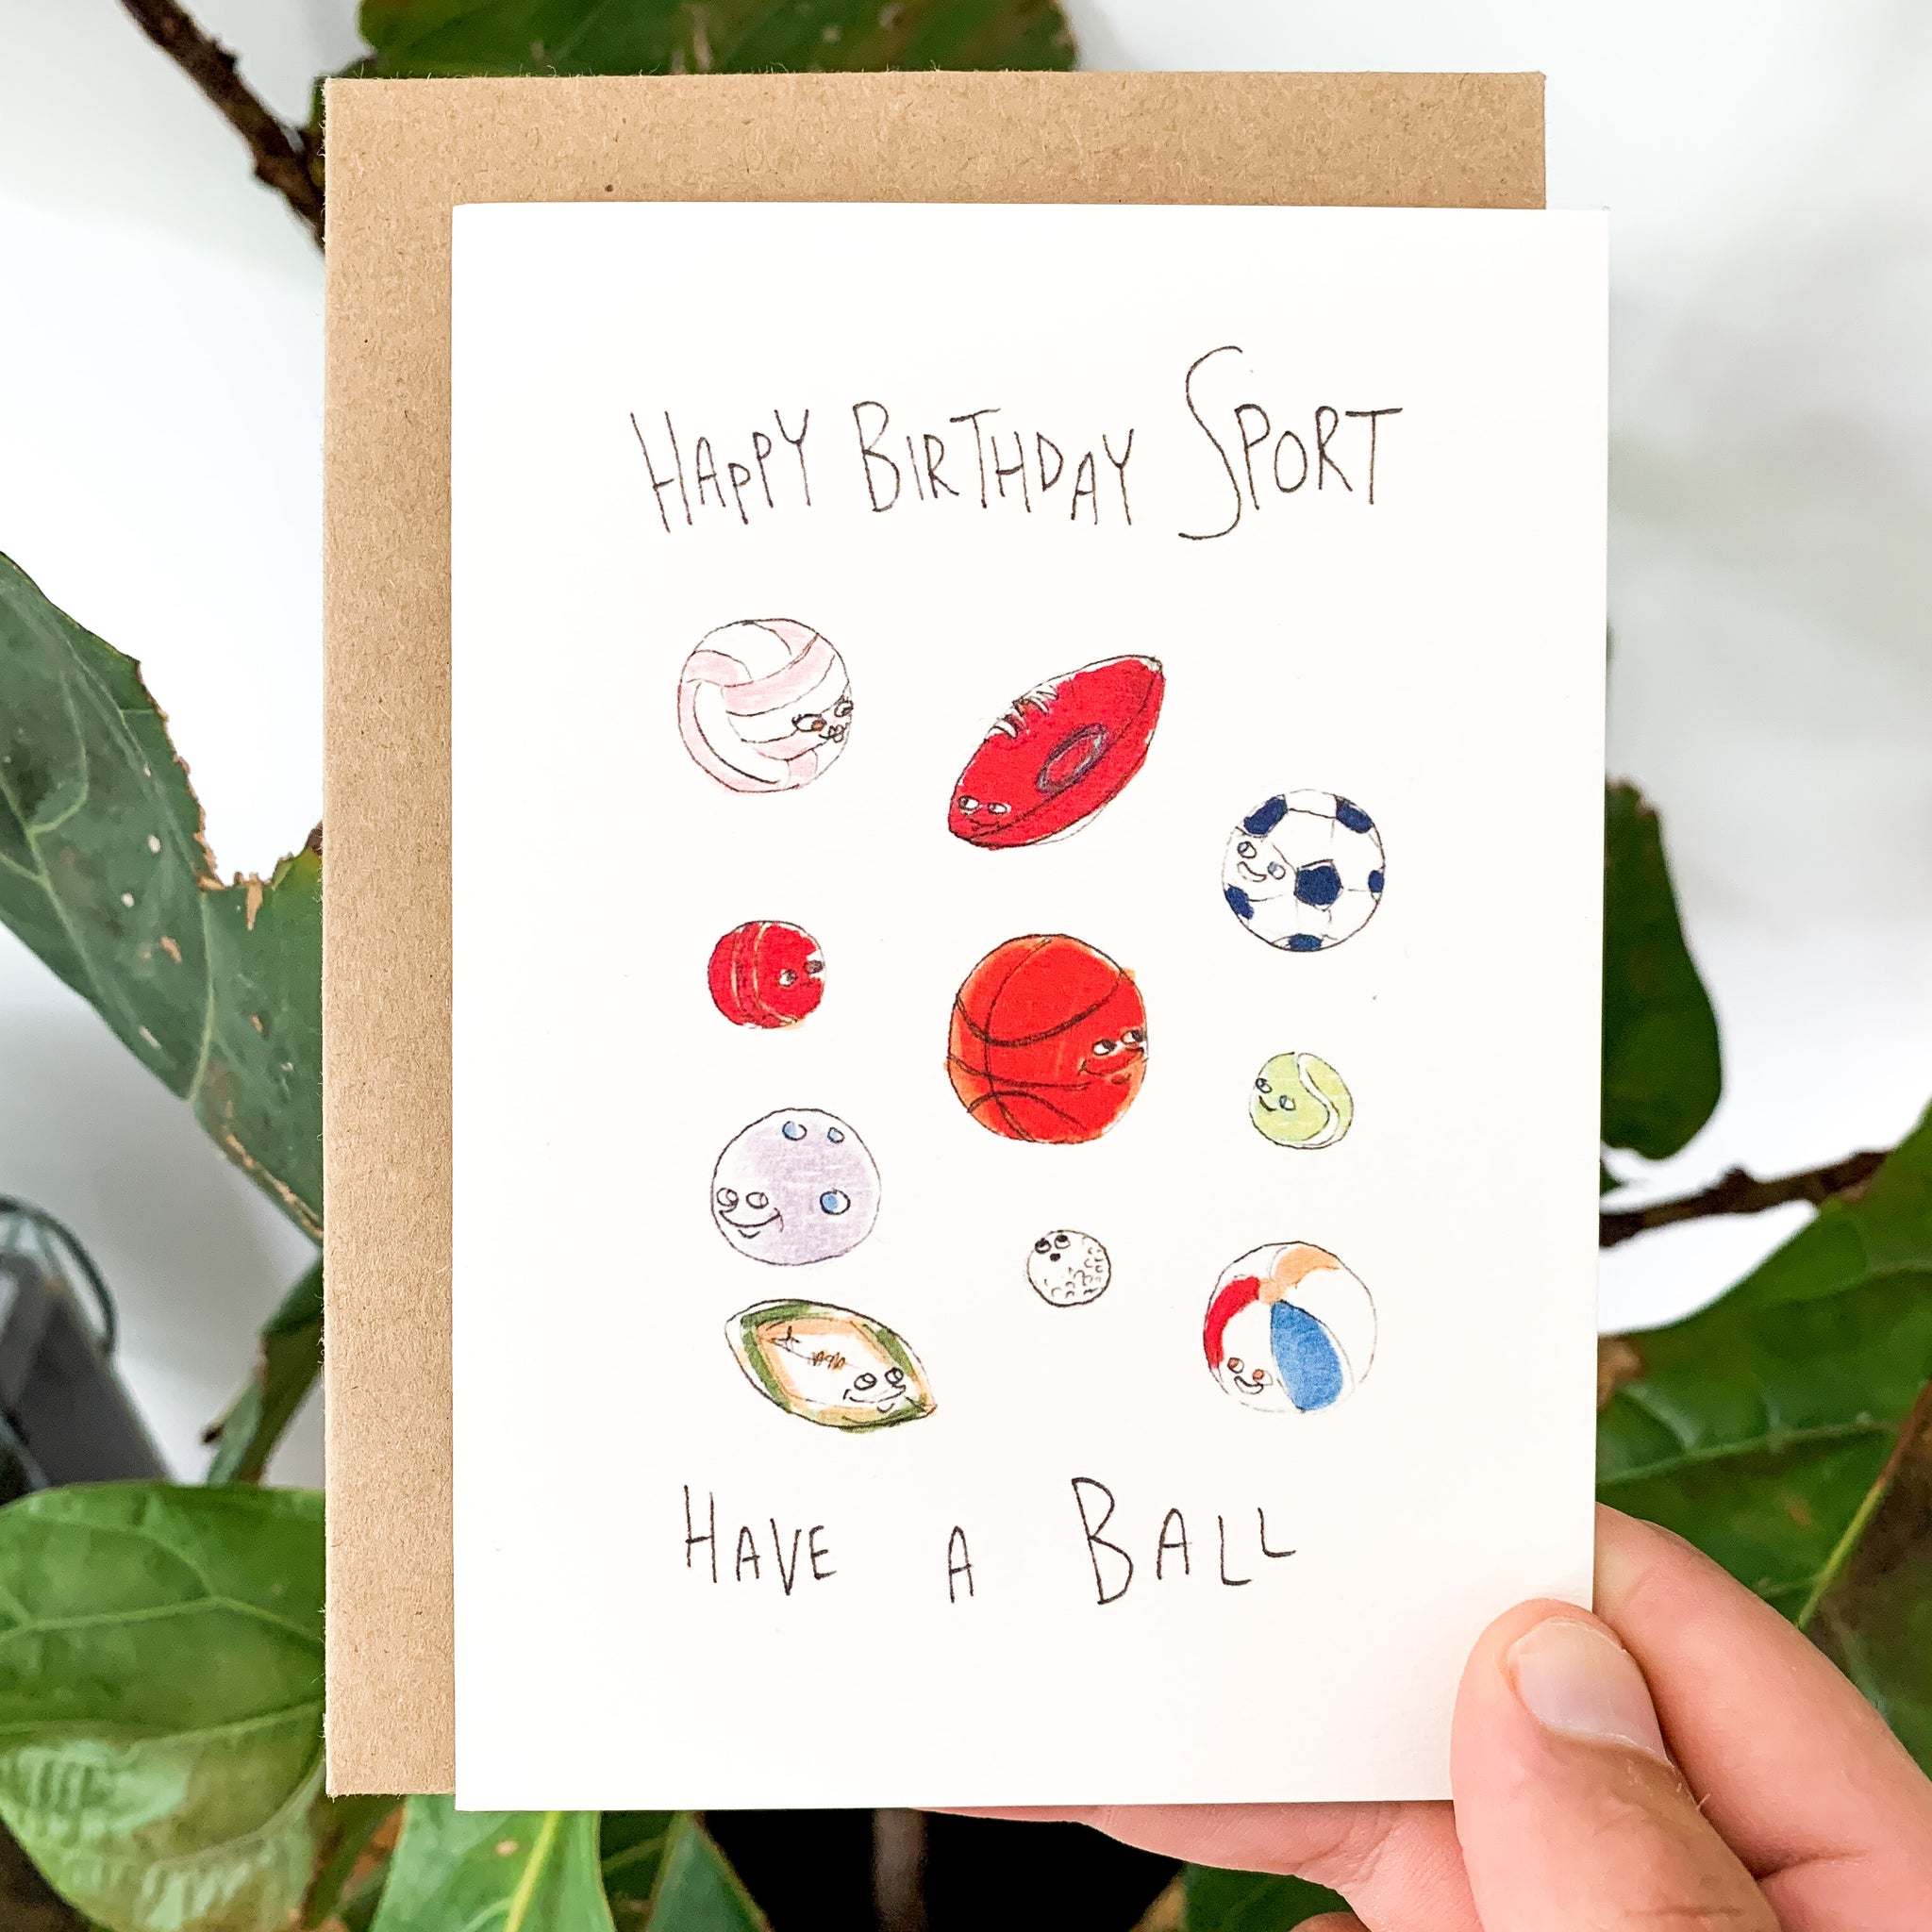 Happy Birthday Sport, Have A Ball - Well Drawn